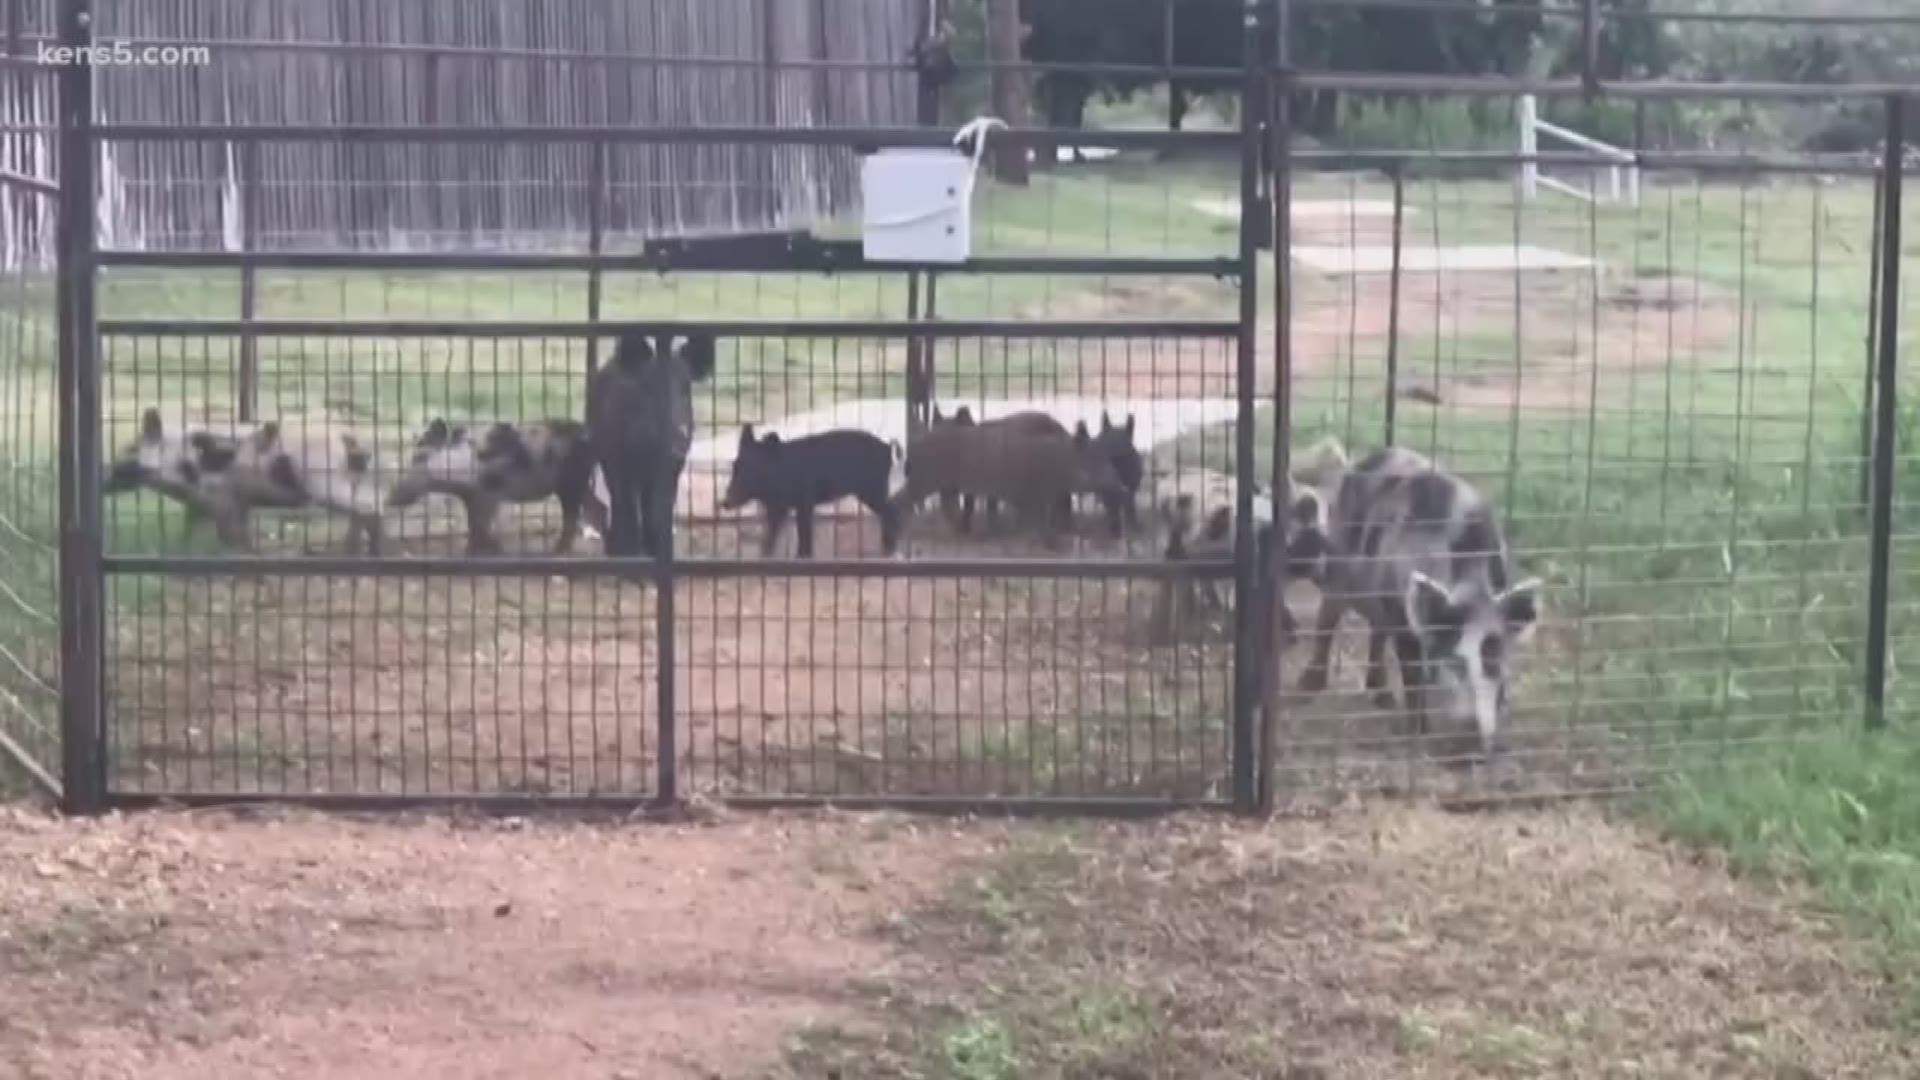 After KENS 5 aired a story about a northwest-side neighborhood's feral hog problem, the homeowners' association is tackling the problem.